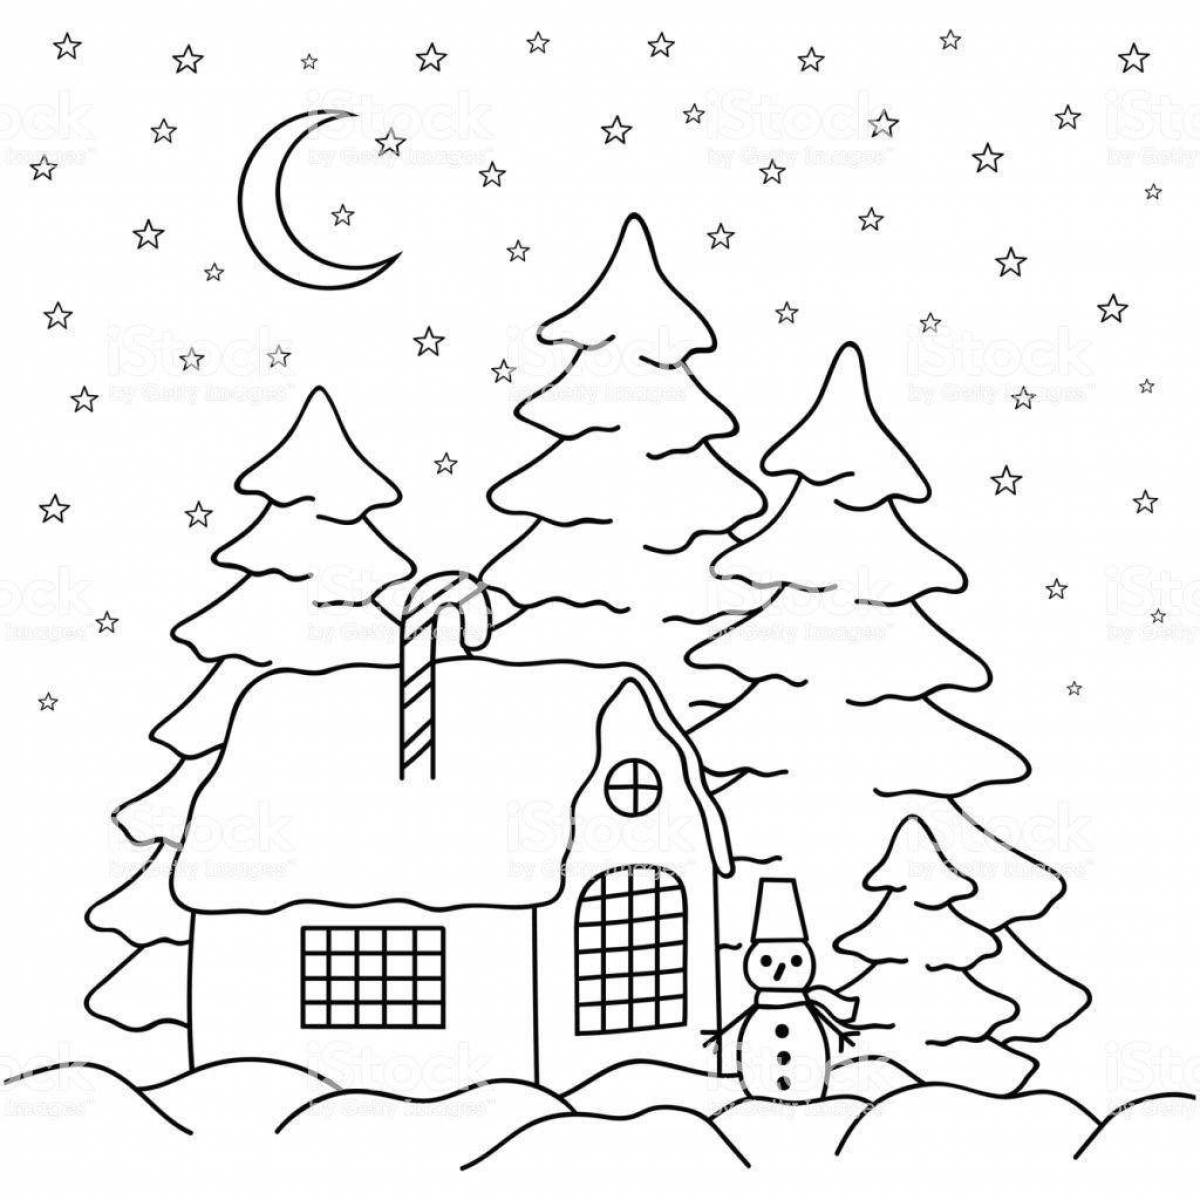 Coloring for an exquisite winter landscape